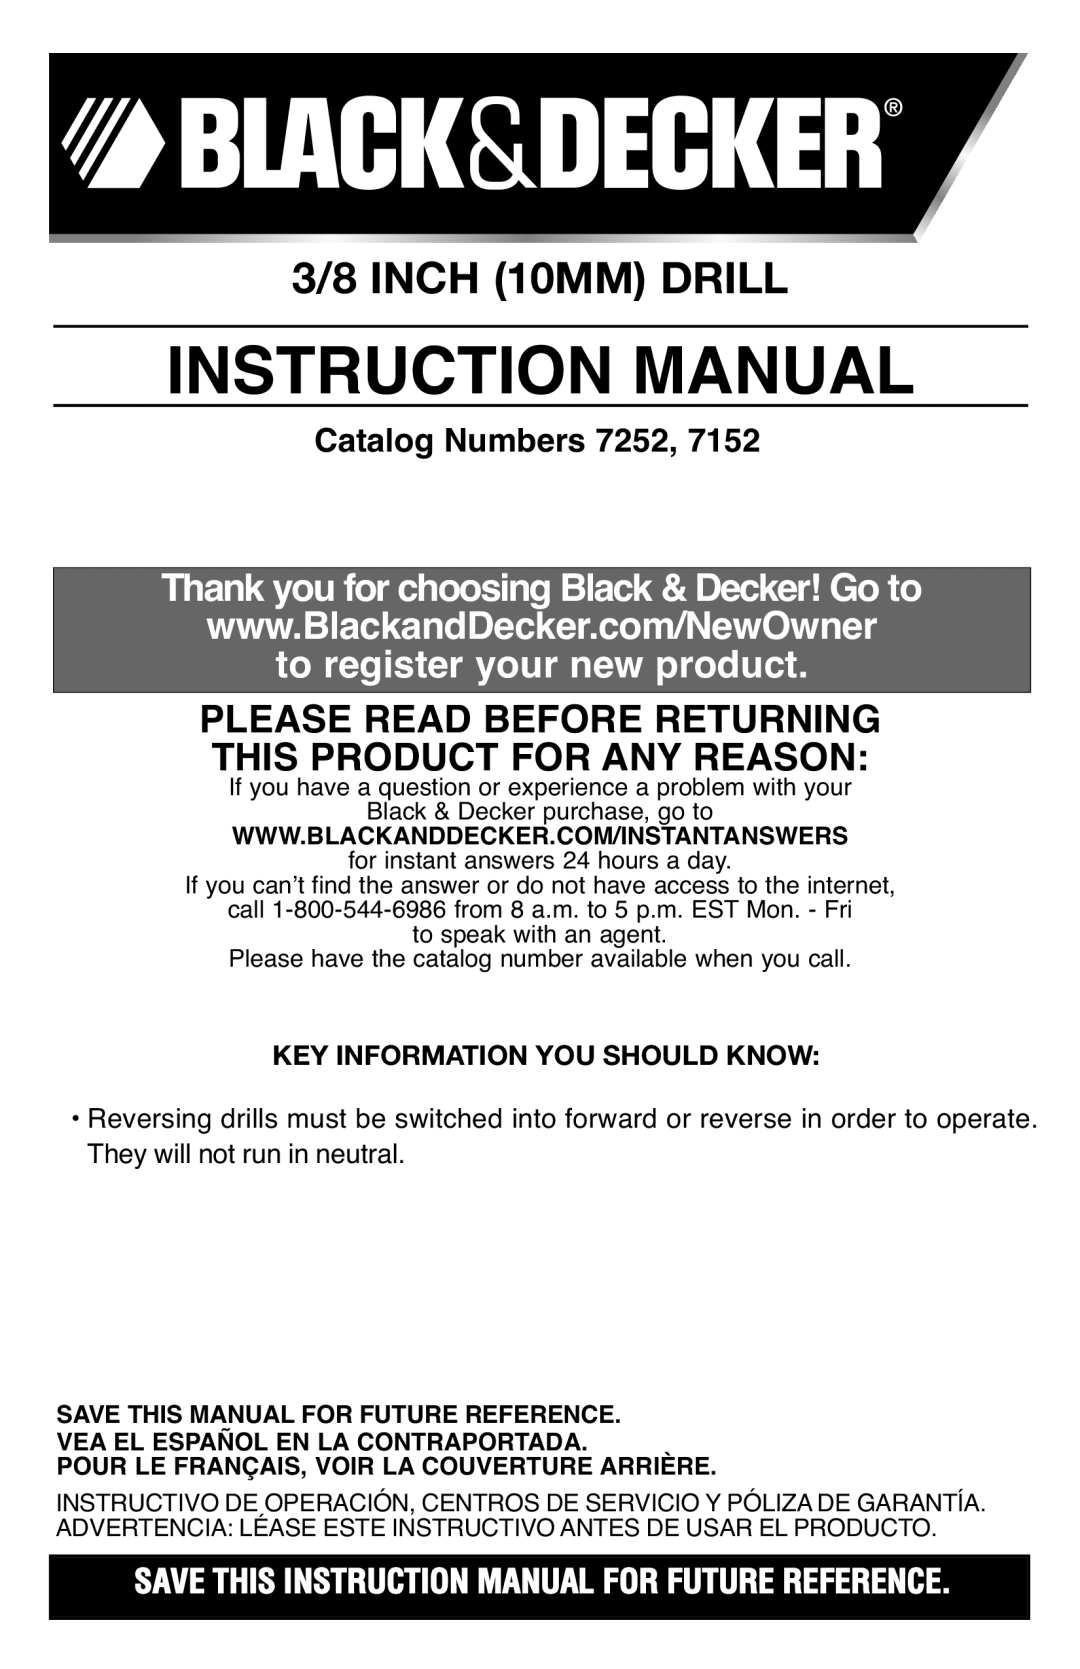 Black & Decker 7252 instruction manual Please Read Before Returning This Product for ANY Reason 